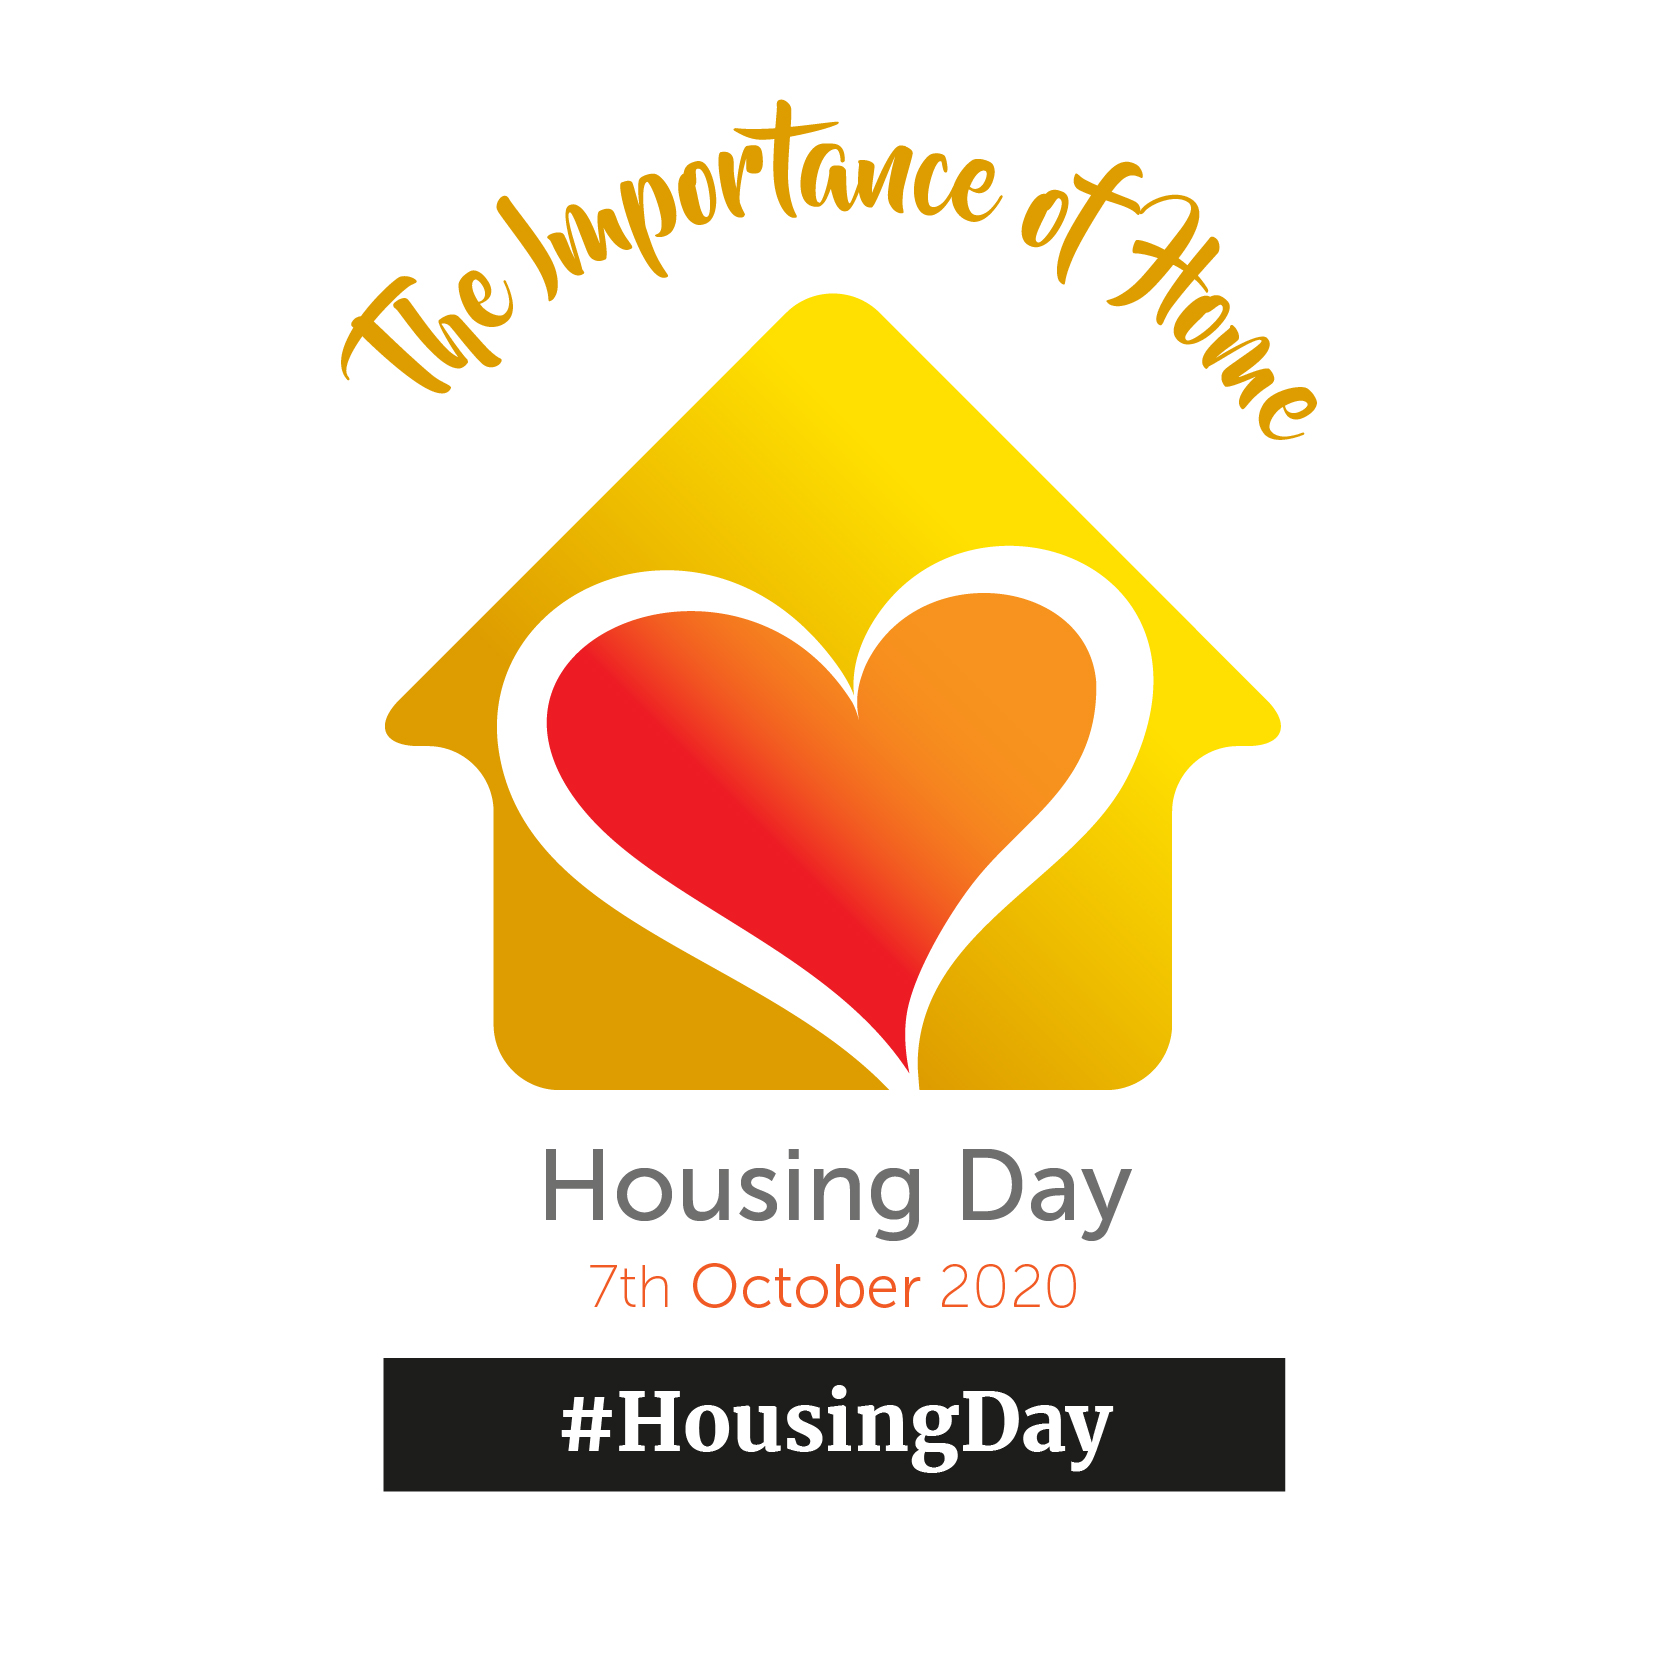 #Housingday: The Importance of a Home